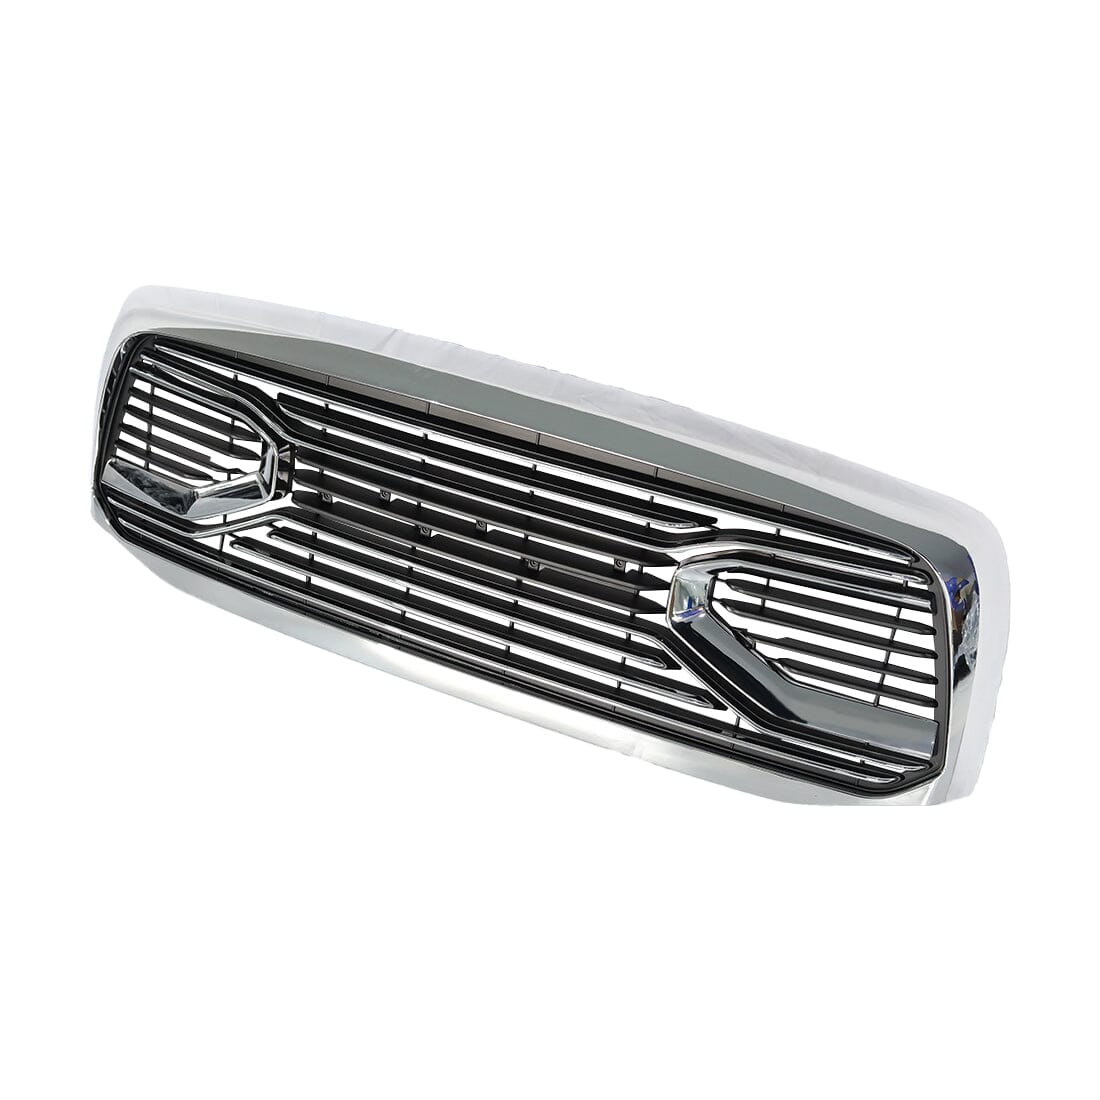 Chrome Big Horn Style Front Grille For 2006-2008 Dodge Ram 1500|Amoffroad